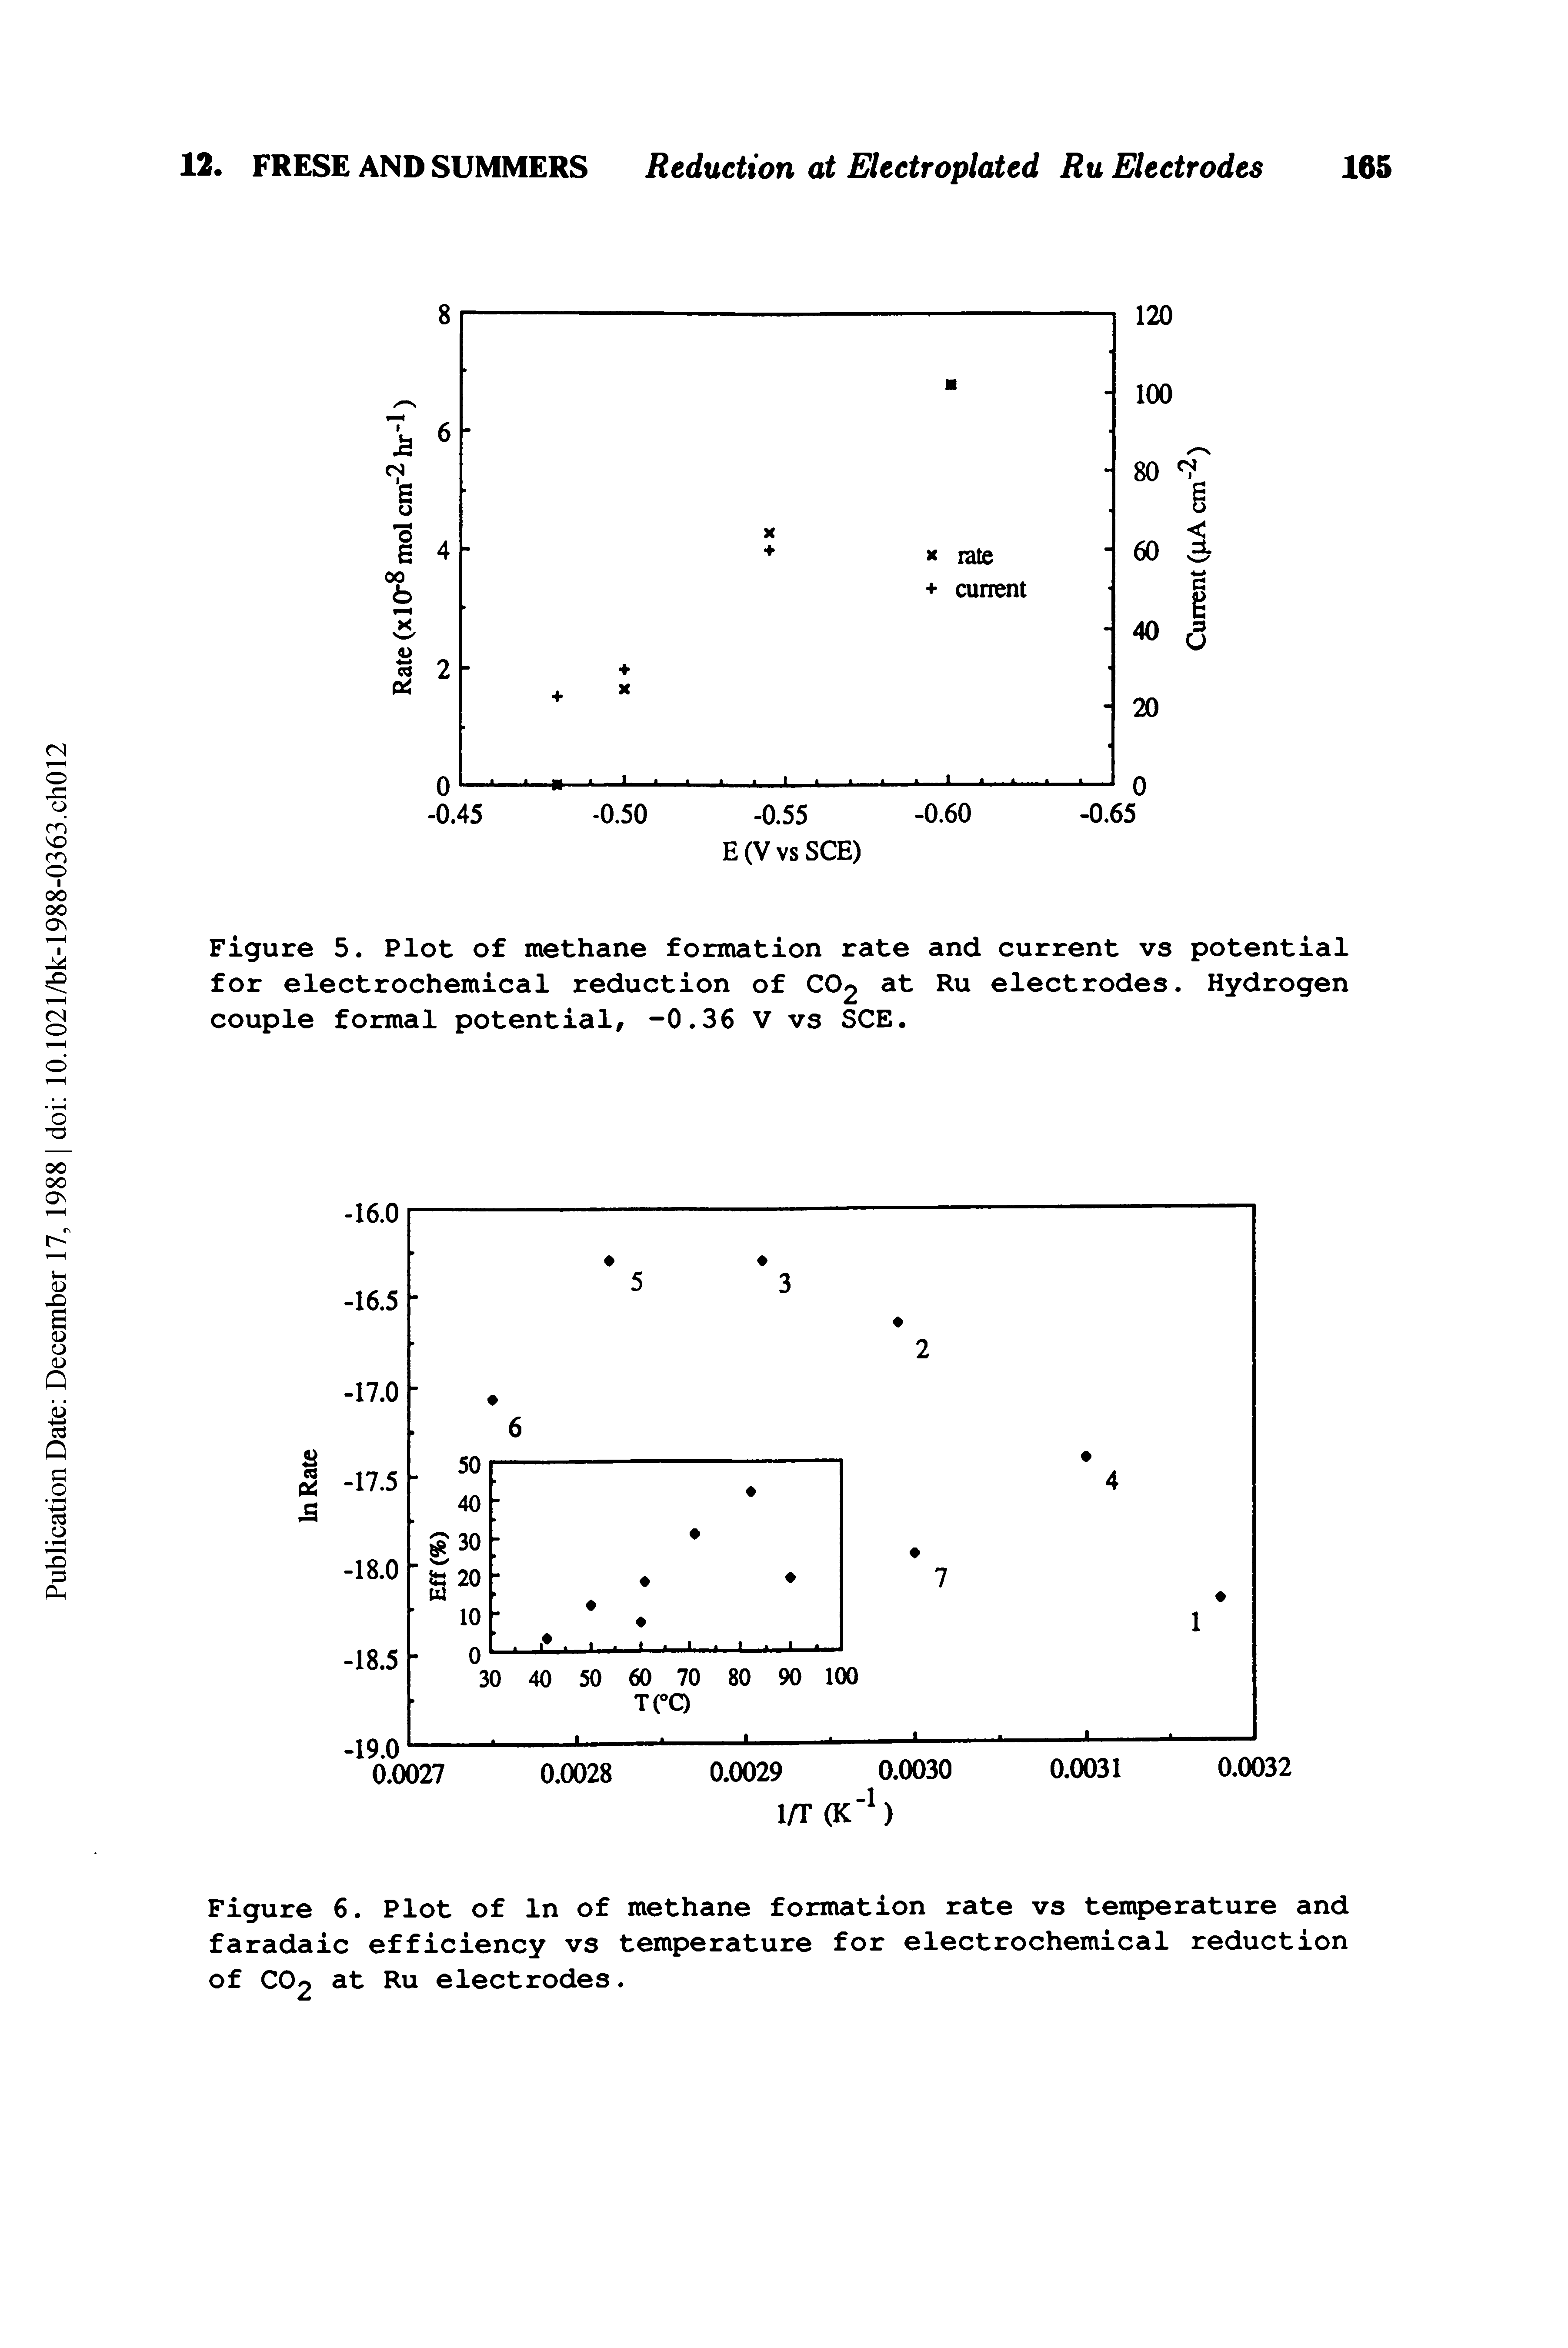 Figure 6. Plot of In of methane formation rate vs temperature and faradaic efficiency vs temperature for electrochemical reduction of CO2 at Ru electrodes.